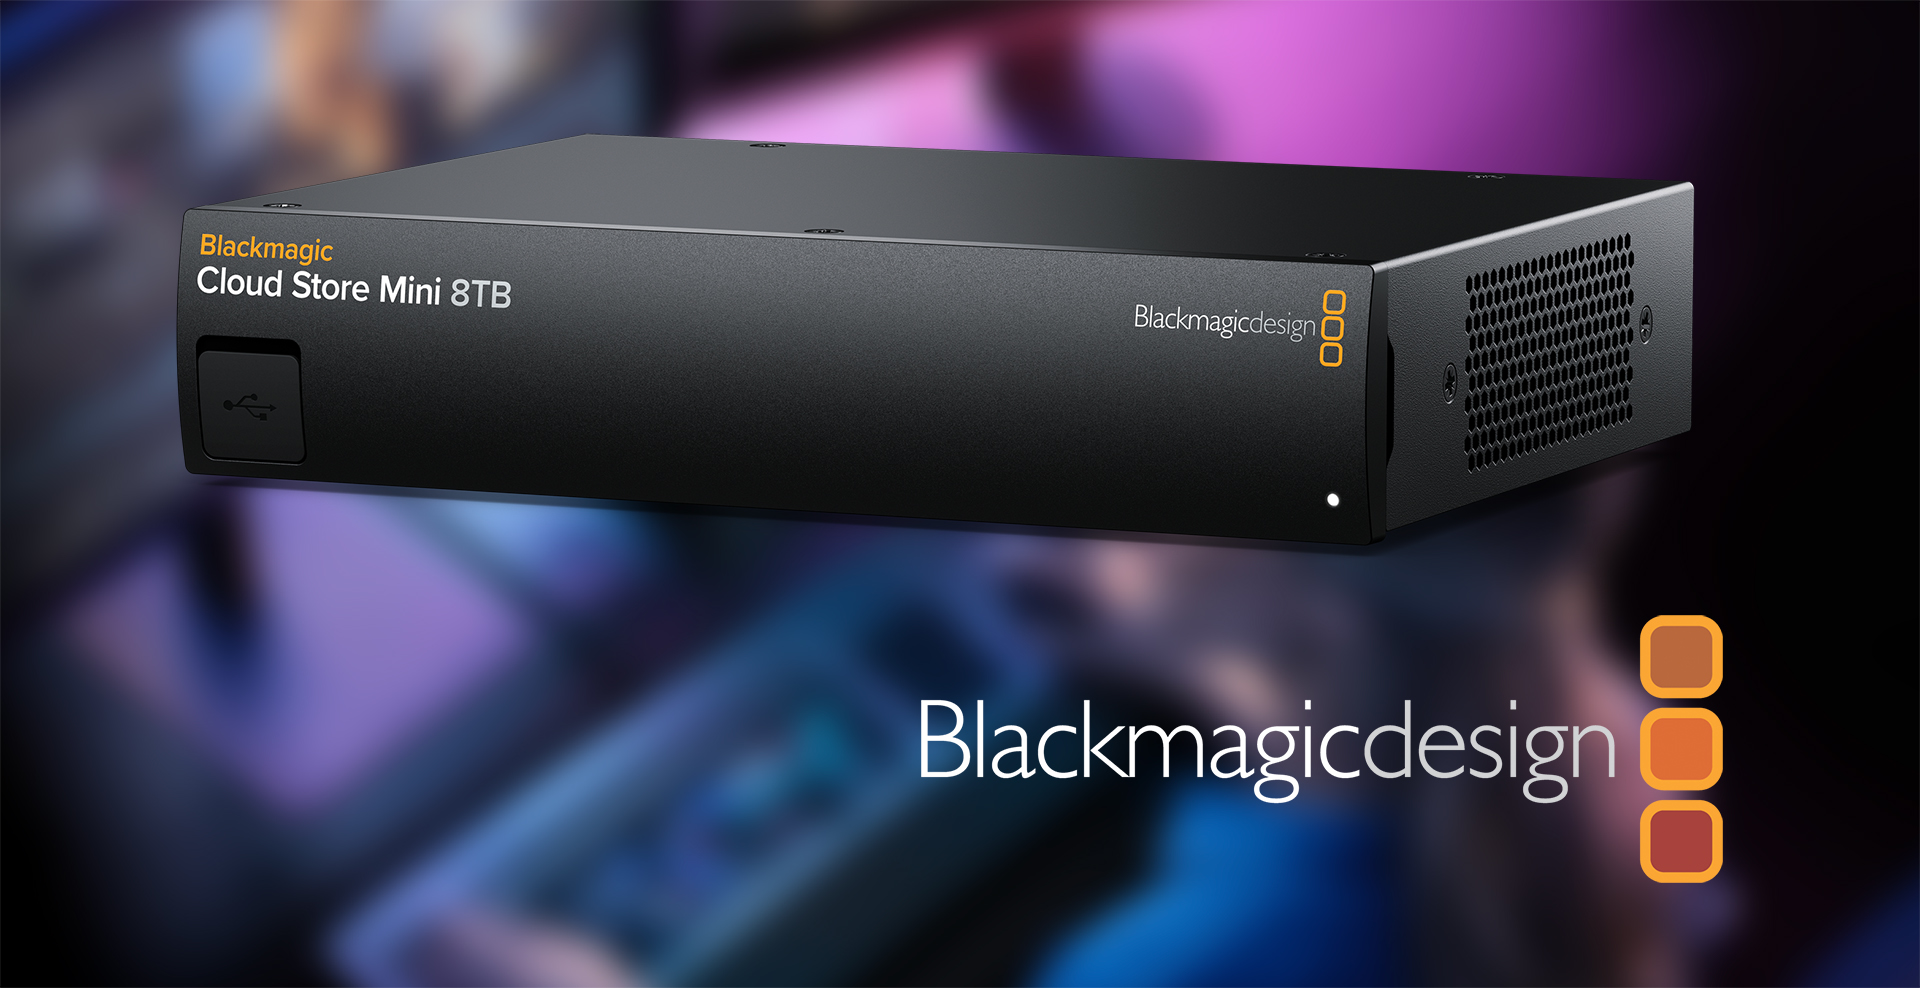 Review: A look at the Blackmagic Cloud Store Mini 8